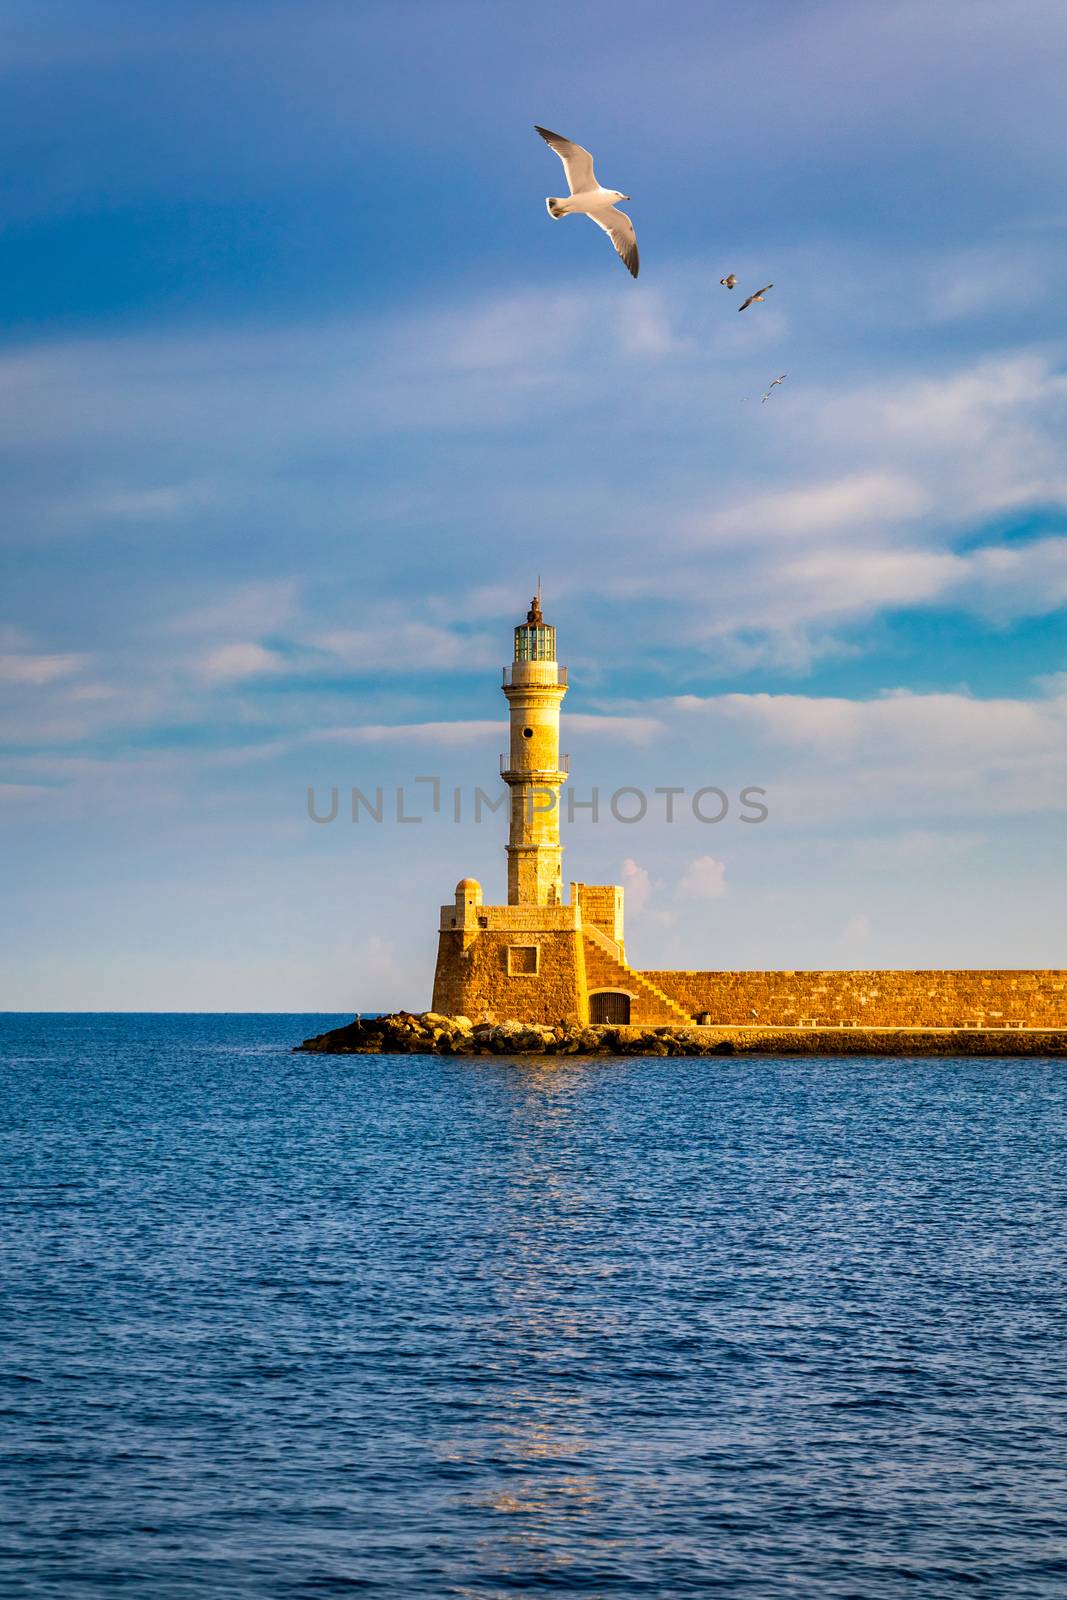 Venetian harbour and lighthouse in old harbour of Chania with seagulls flying over, Crete, Greece. Old venetian lighthouse in Chania, Greece. Lighthouse of the old Venetian port in Chania, Greece.